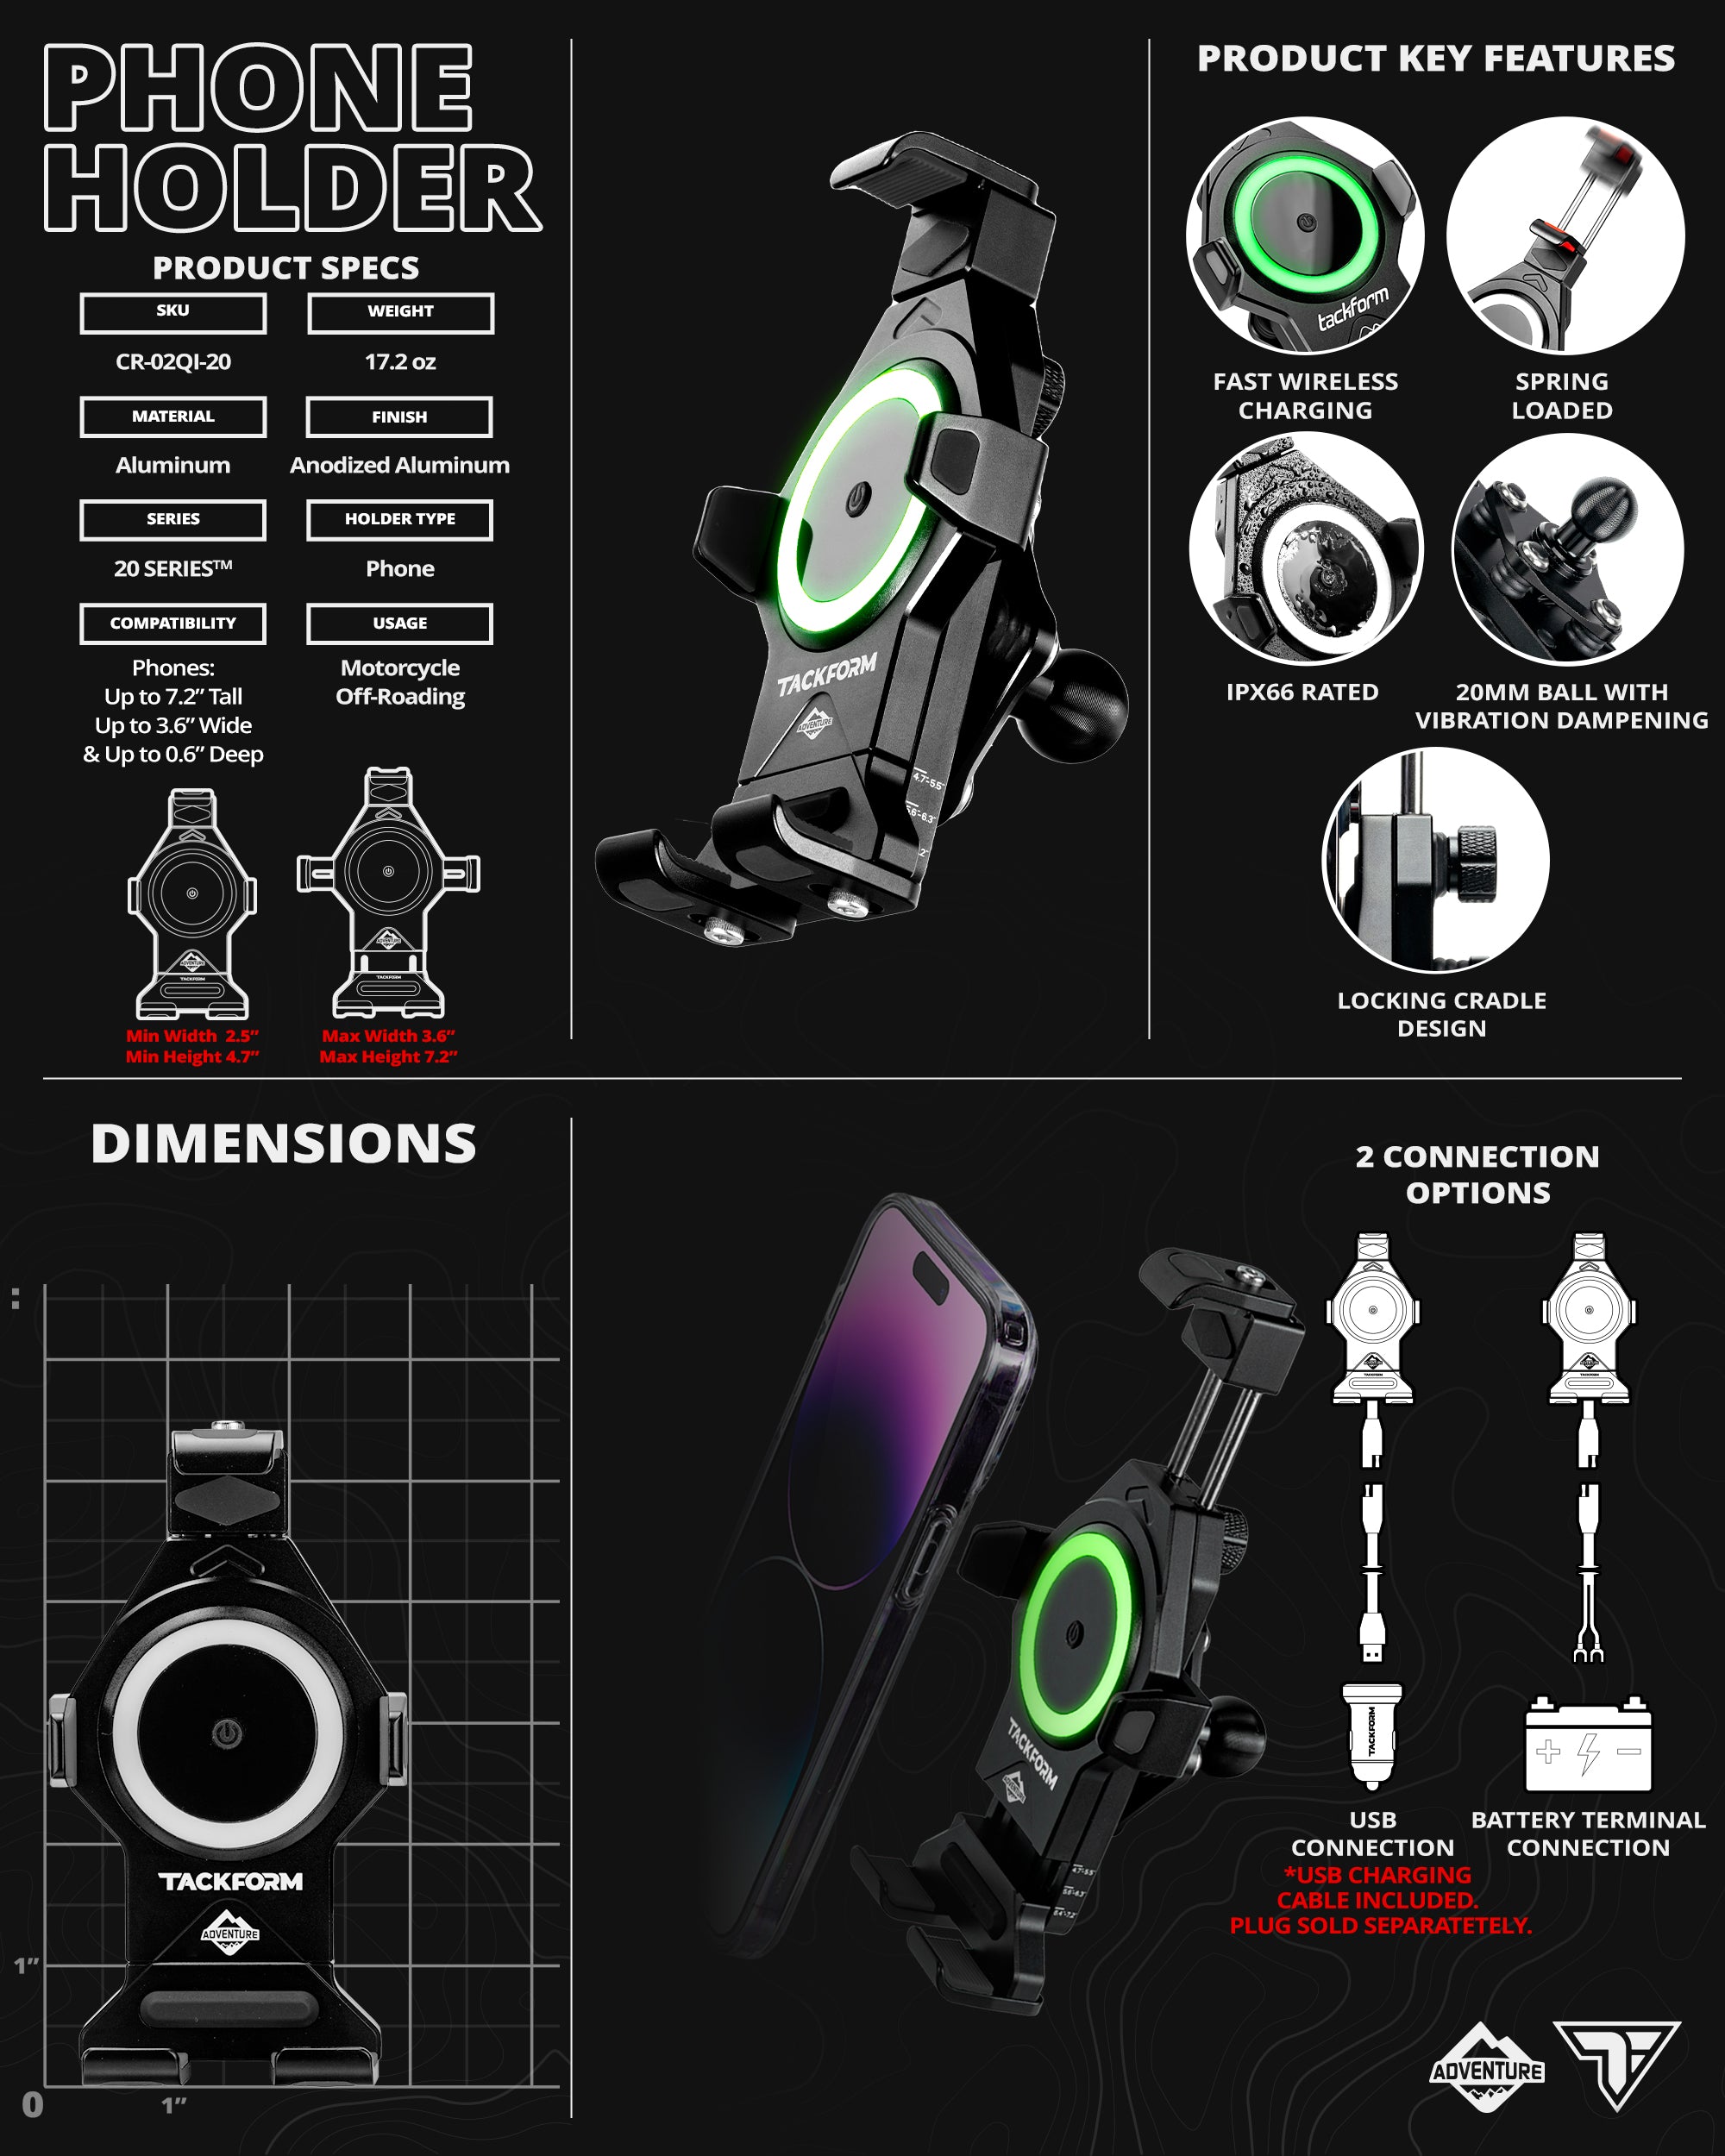 20 Series Motorcycle Phone Mount with Vibration Dampening and Wireless Charging Adventure Cradle